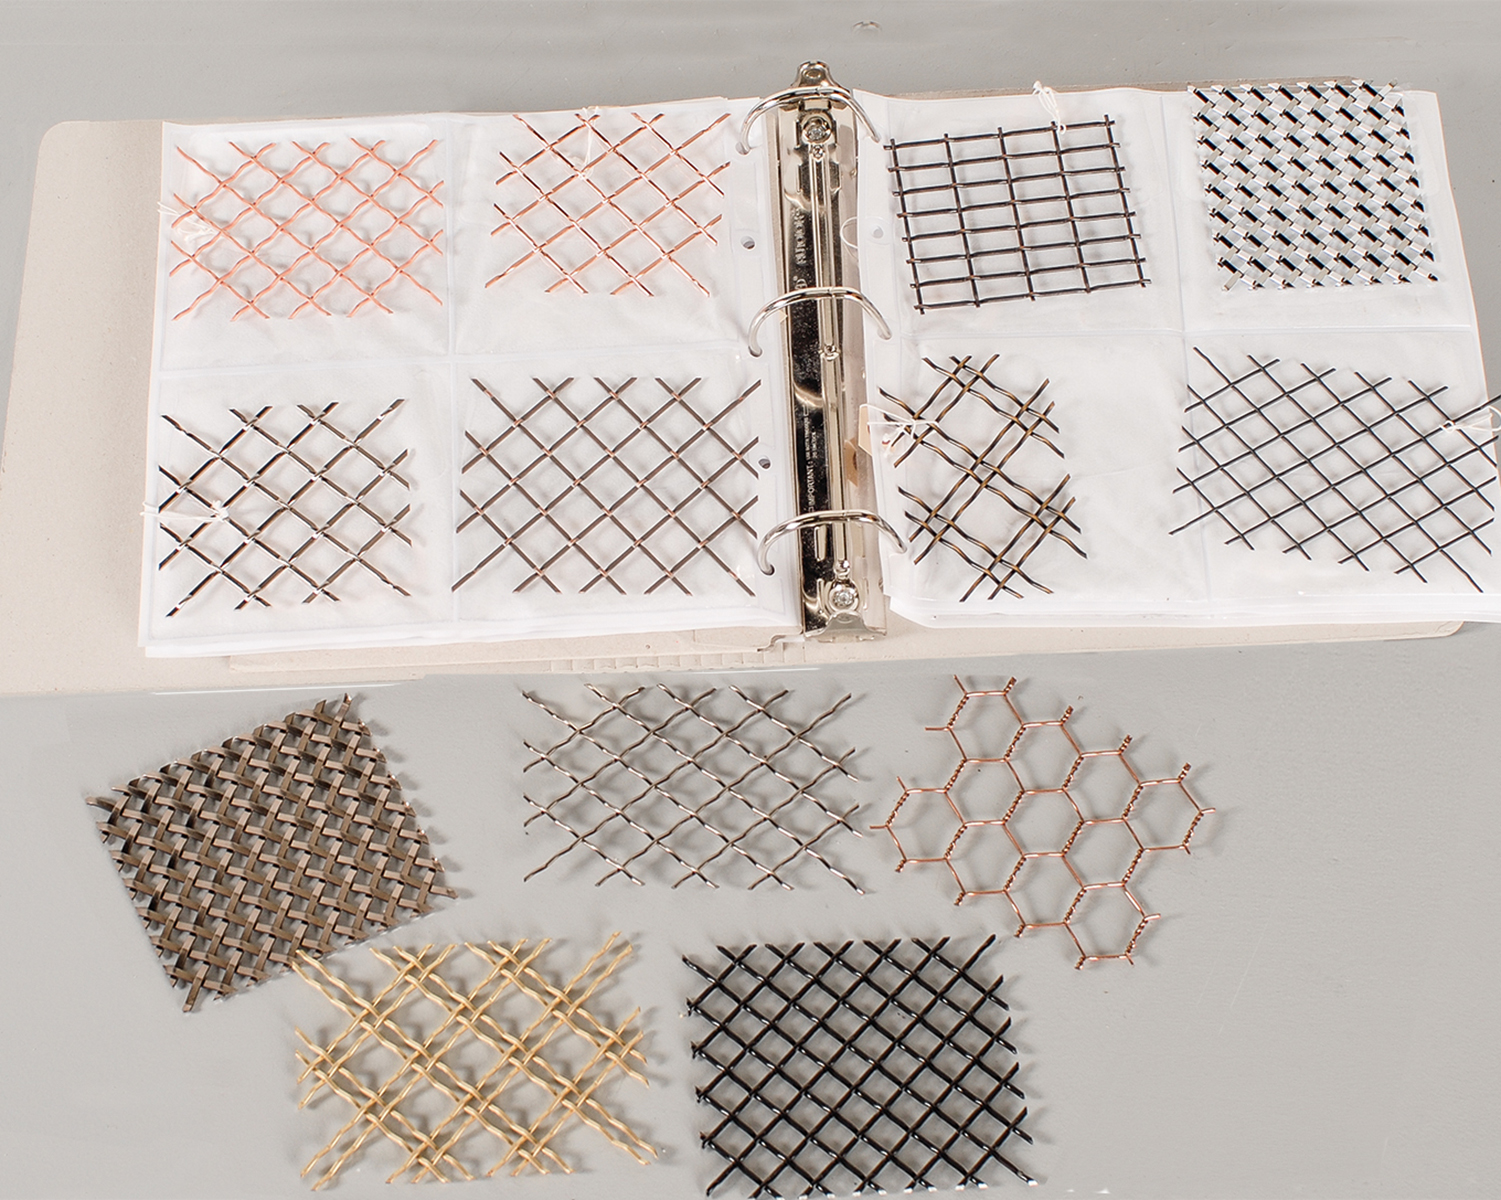 Outwater’s Woven Wire Grille Sample Kit